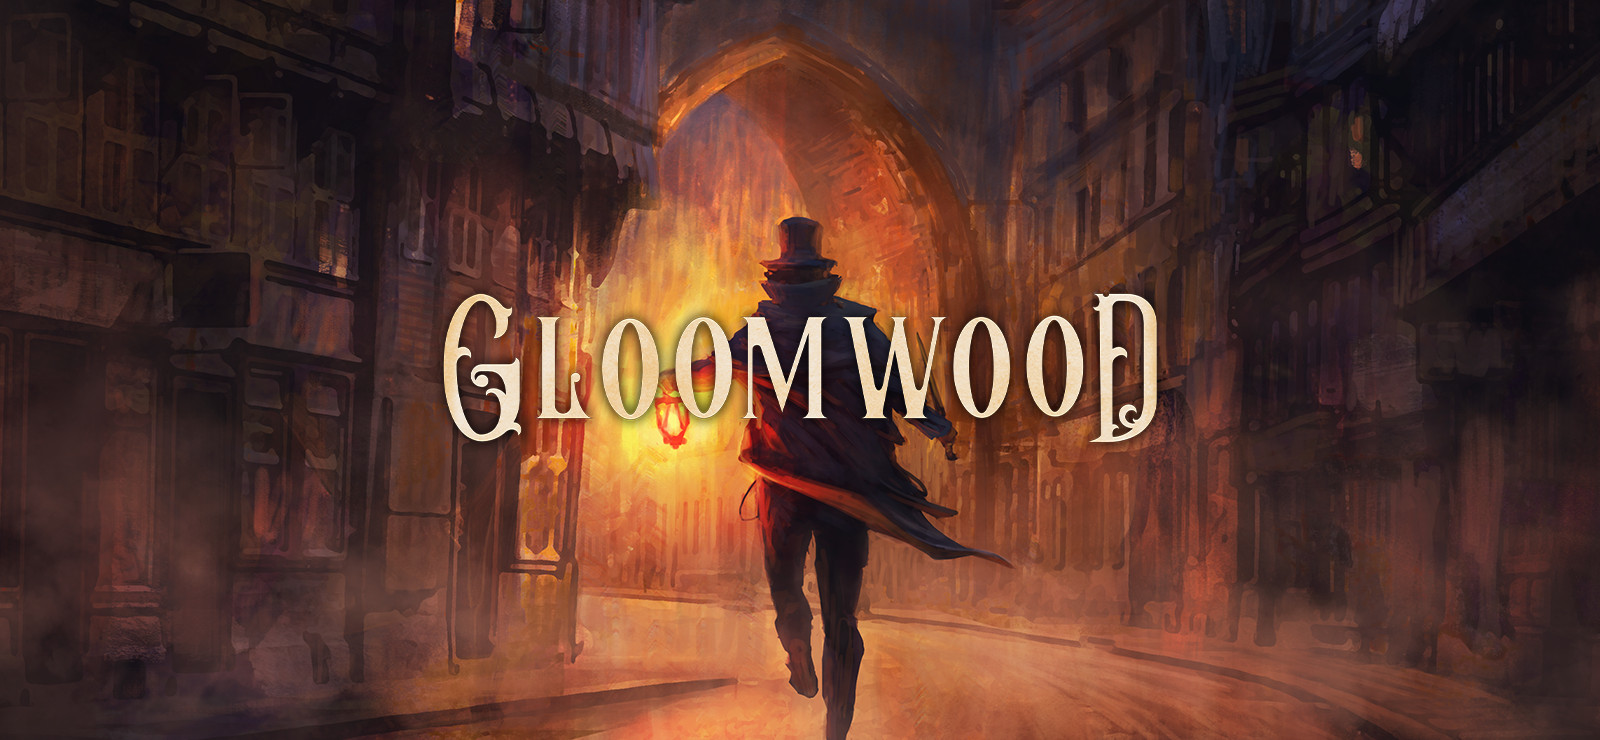 For Thief fans: Stealth horror shooter Gloomwood coming to Steam Early Access soon